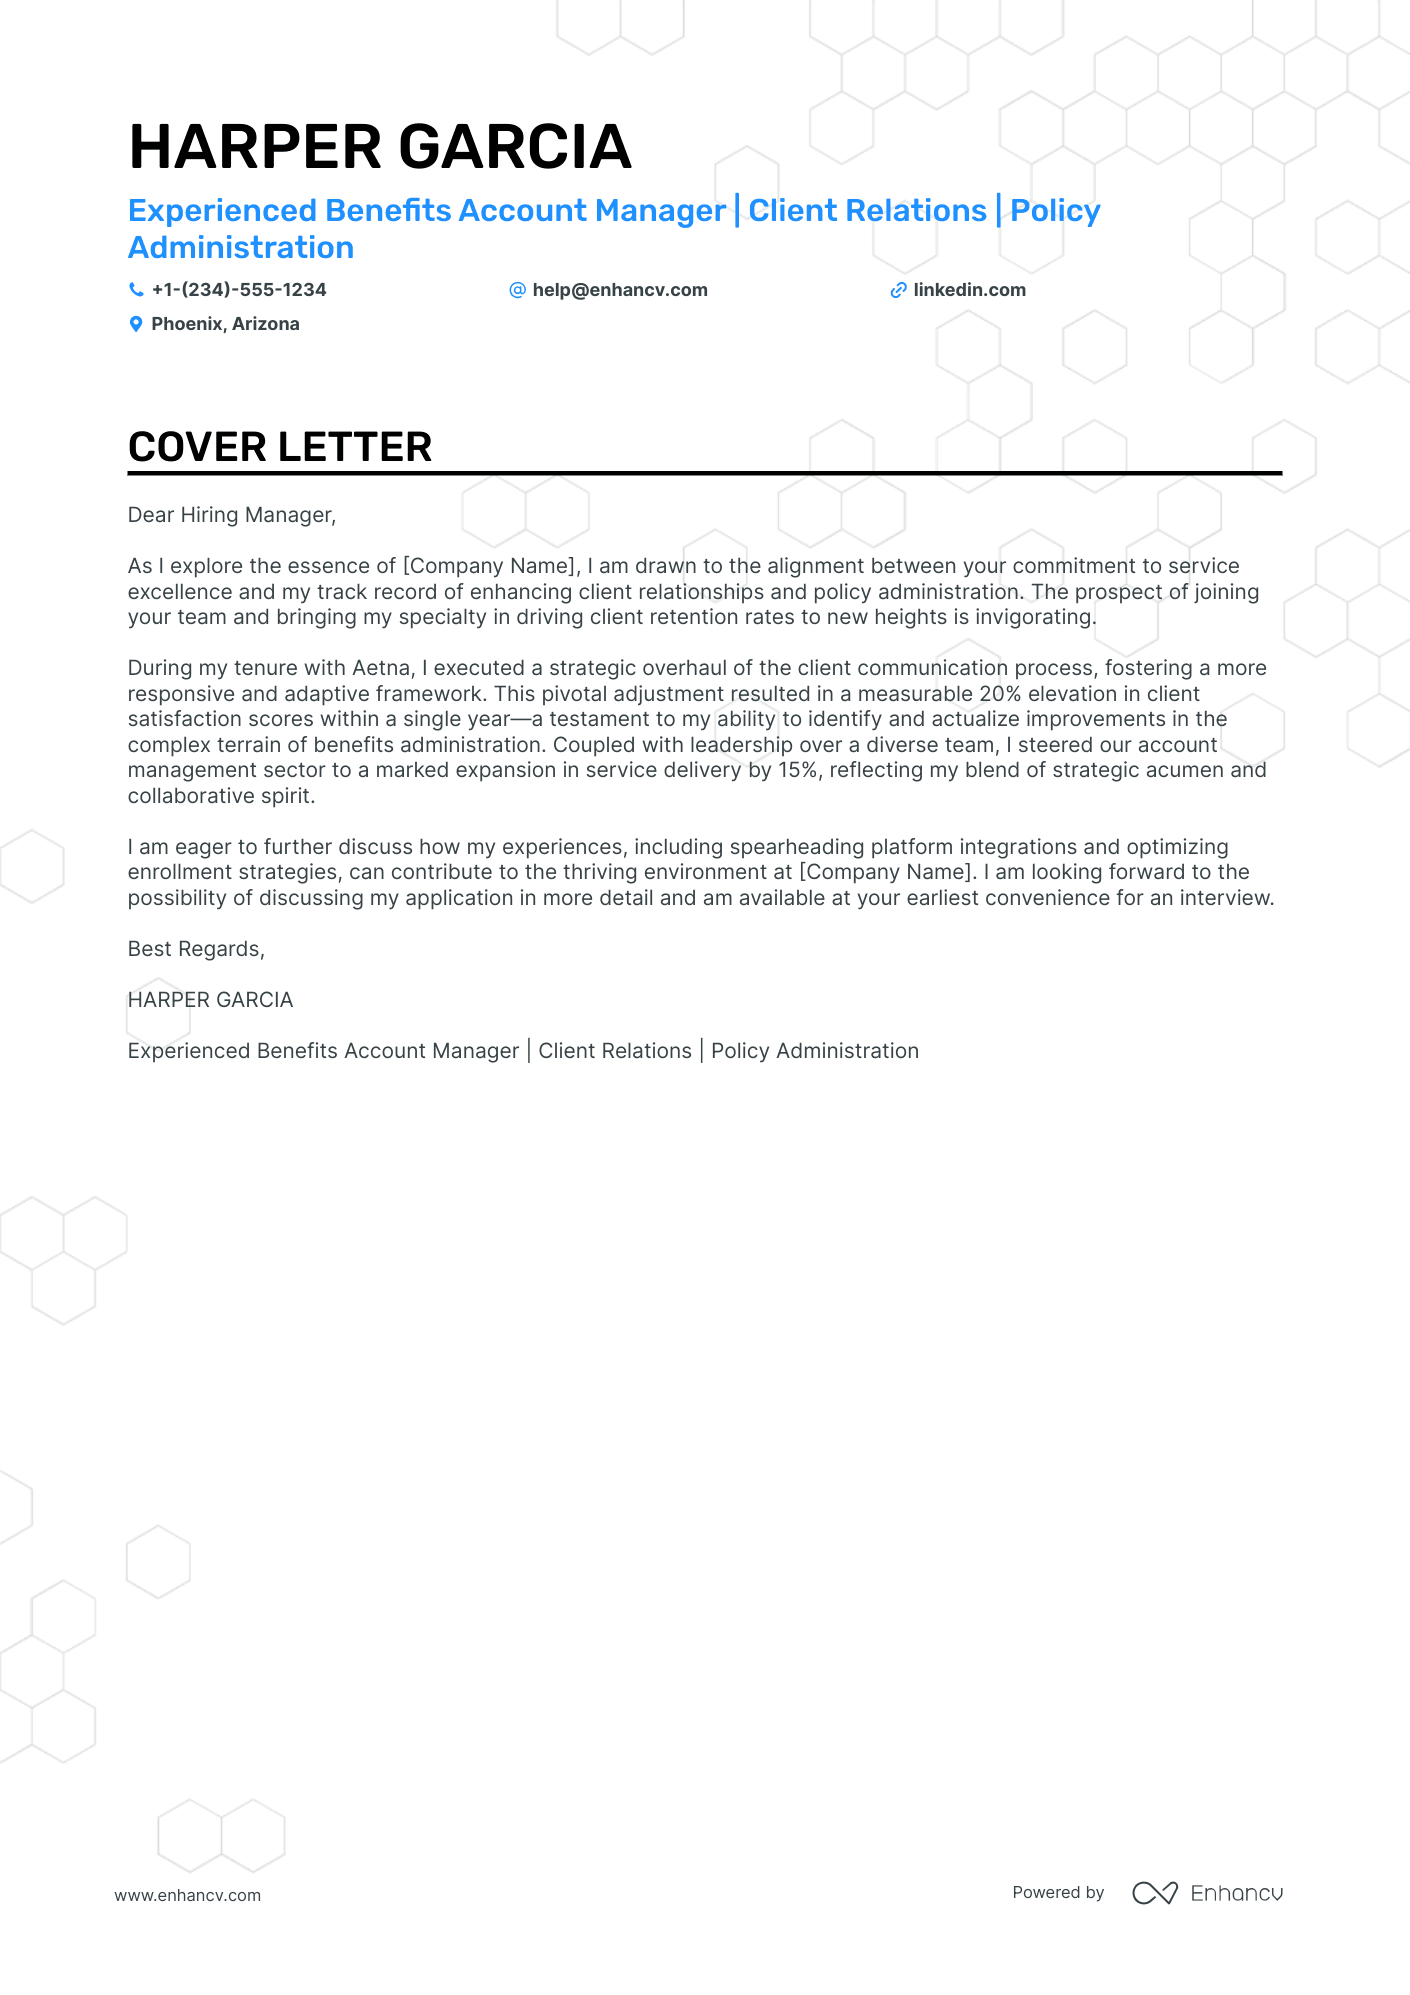 Client Account Manager cover letter